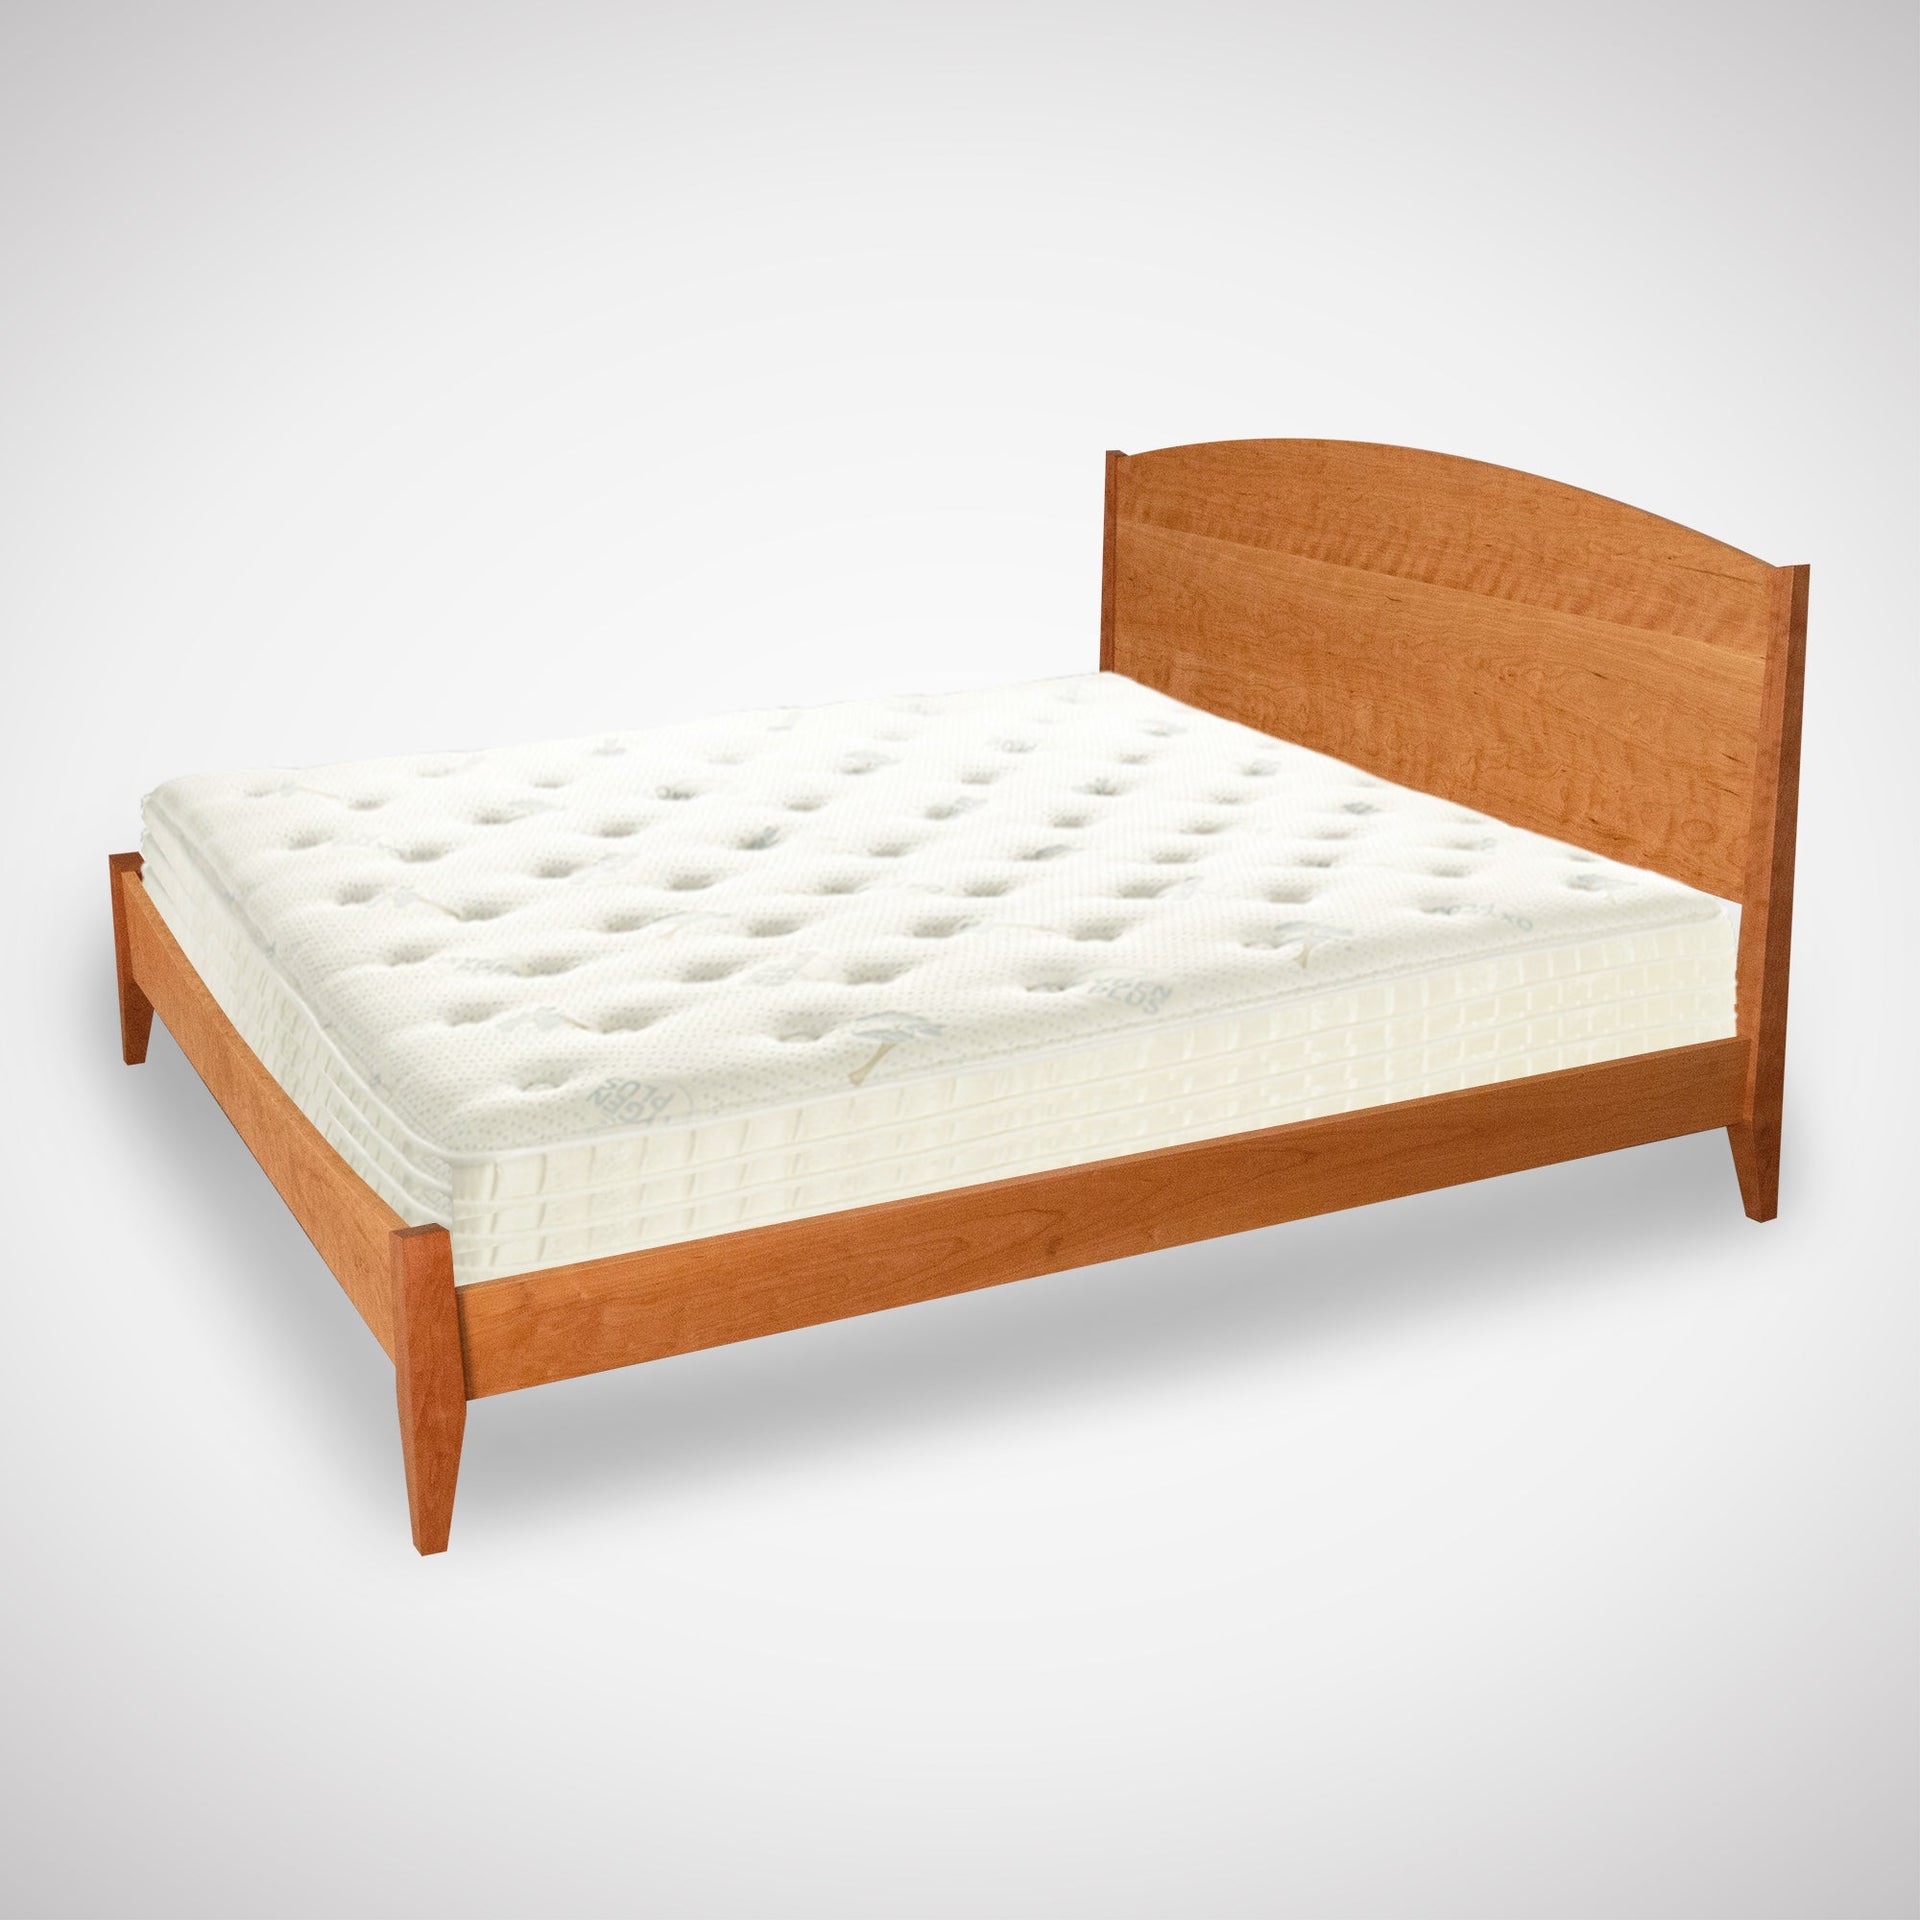 Solid wood bed frame crafted in Columbus, Ohio